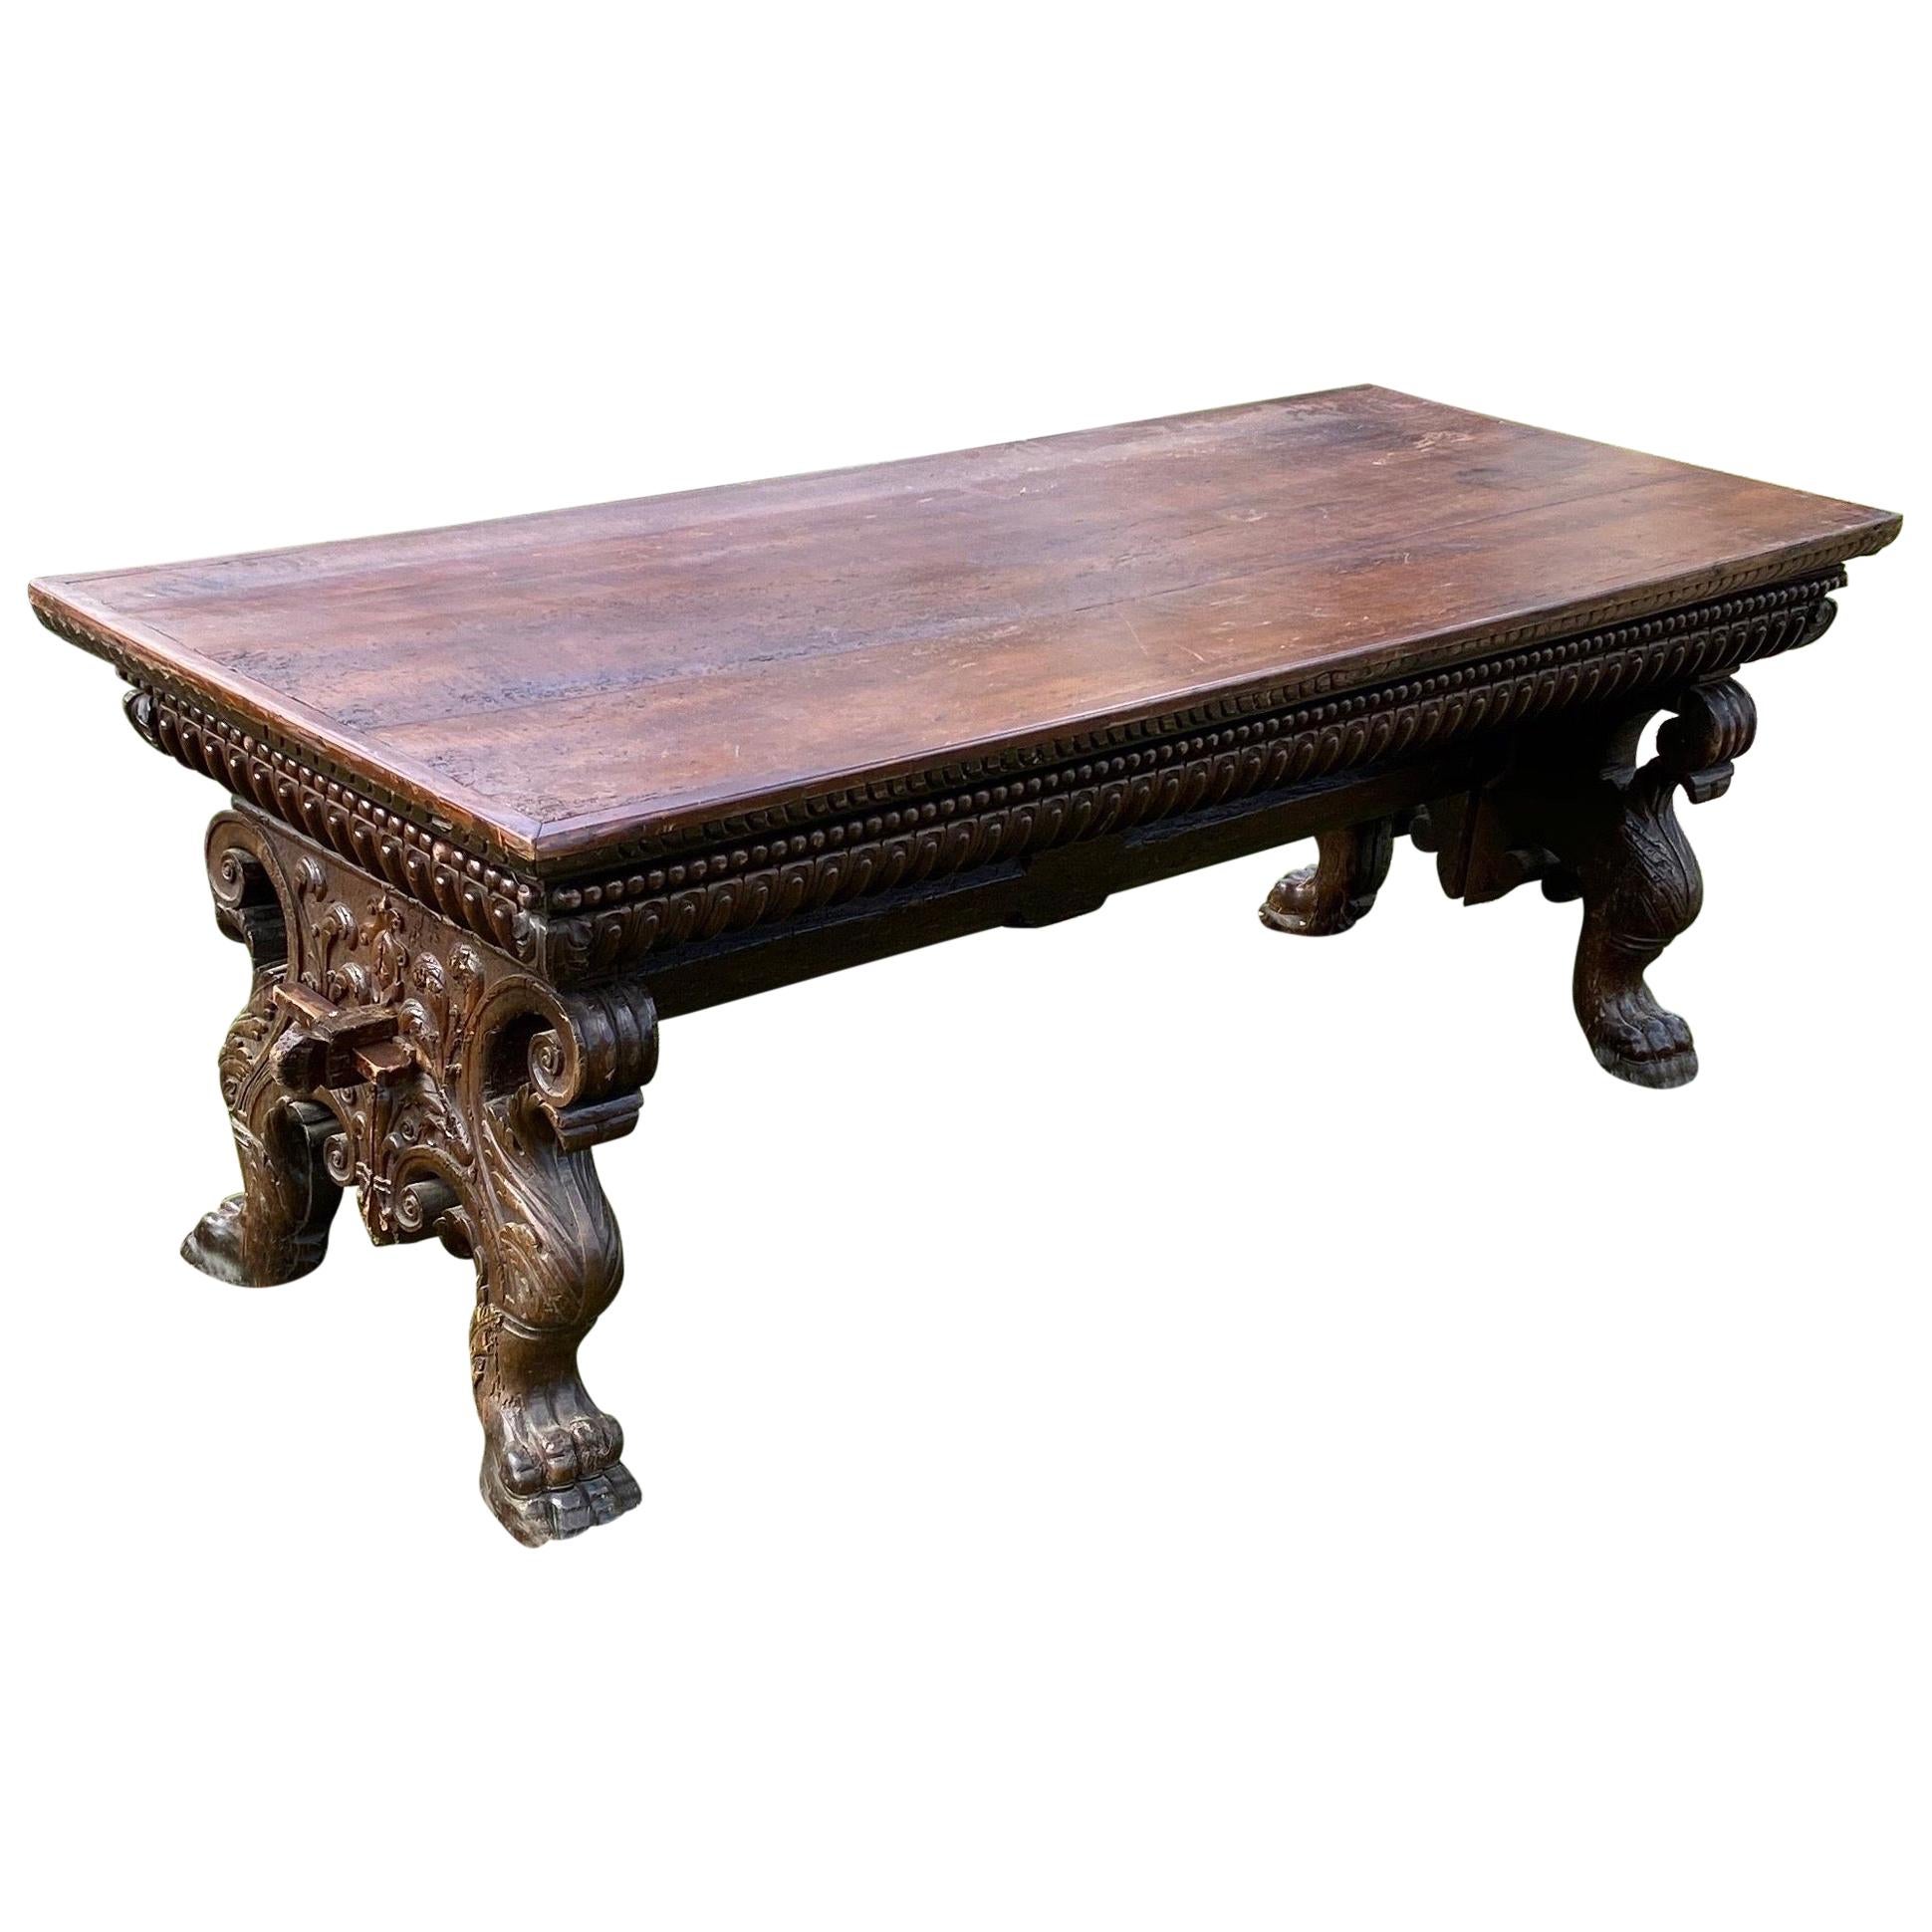 17th-Early 18th Century Tuscan Baroque Walnut Trestle Table